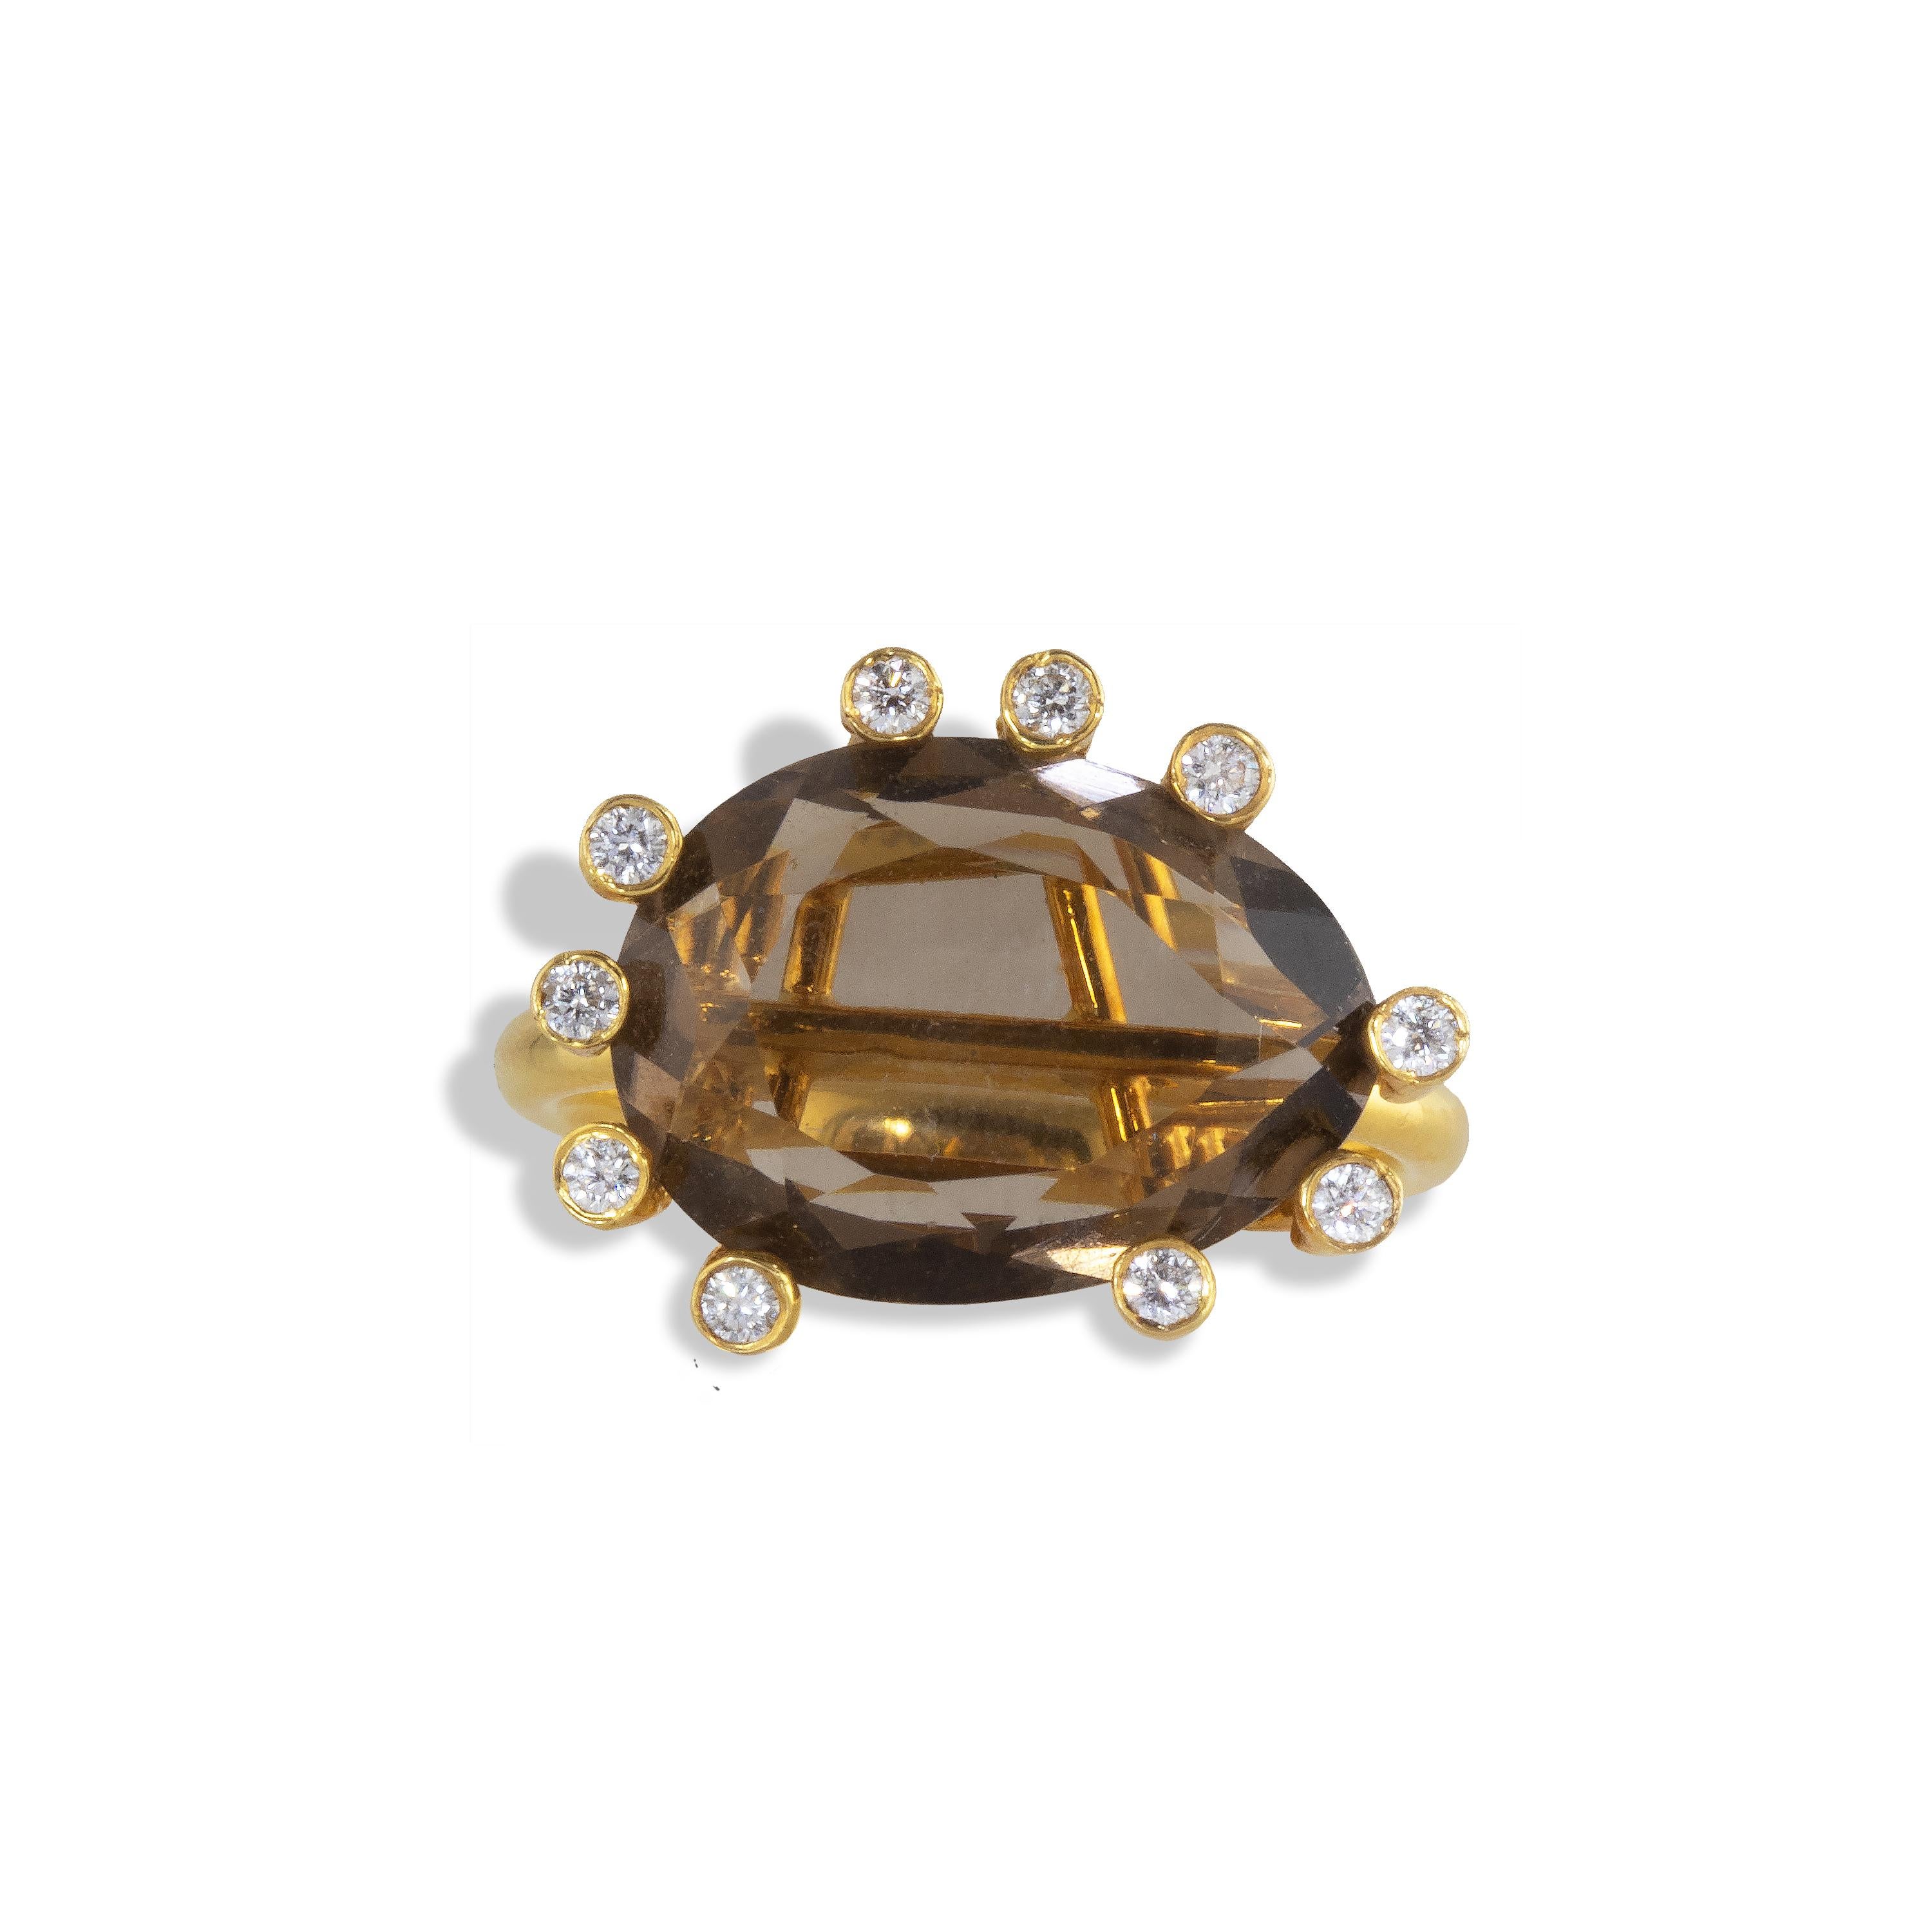 An elegant and dramatic ‘Open Cage’ ring with asymmetrical diamond clusters surrounding a 12 carat large Smokey Topaz  gemstone and .21 carats of white diamonds randomly spaced.  
Smoky quartz is the National Gem of Scotland and has been considered